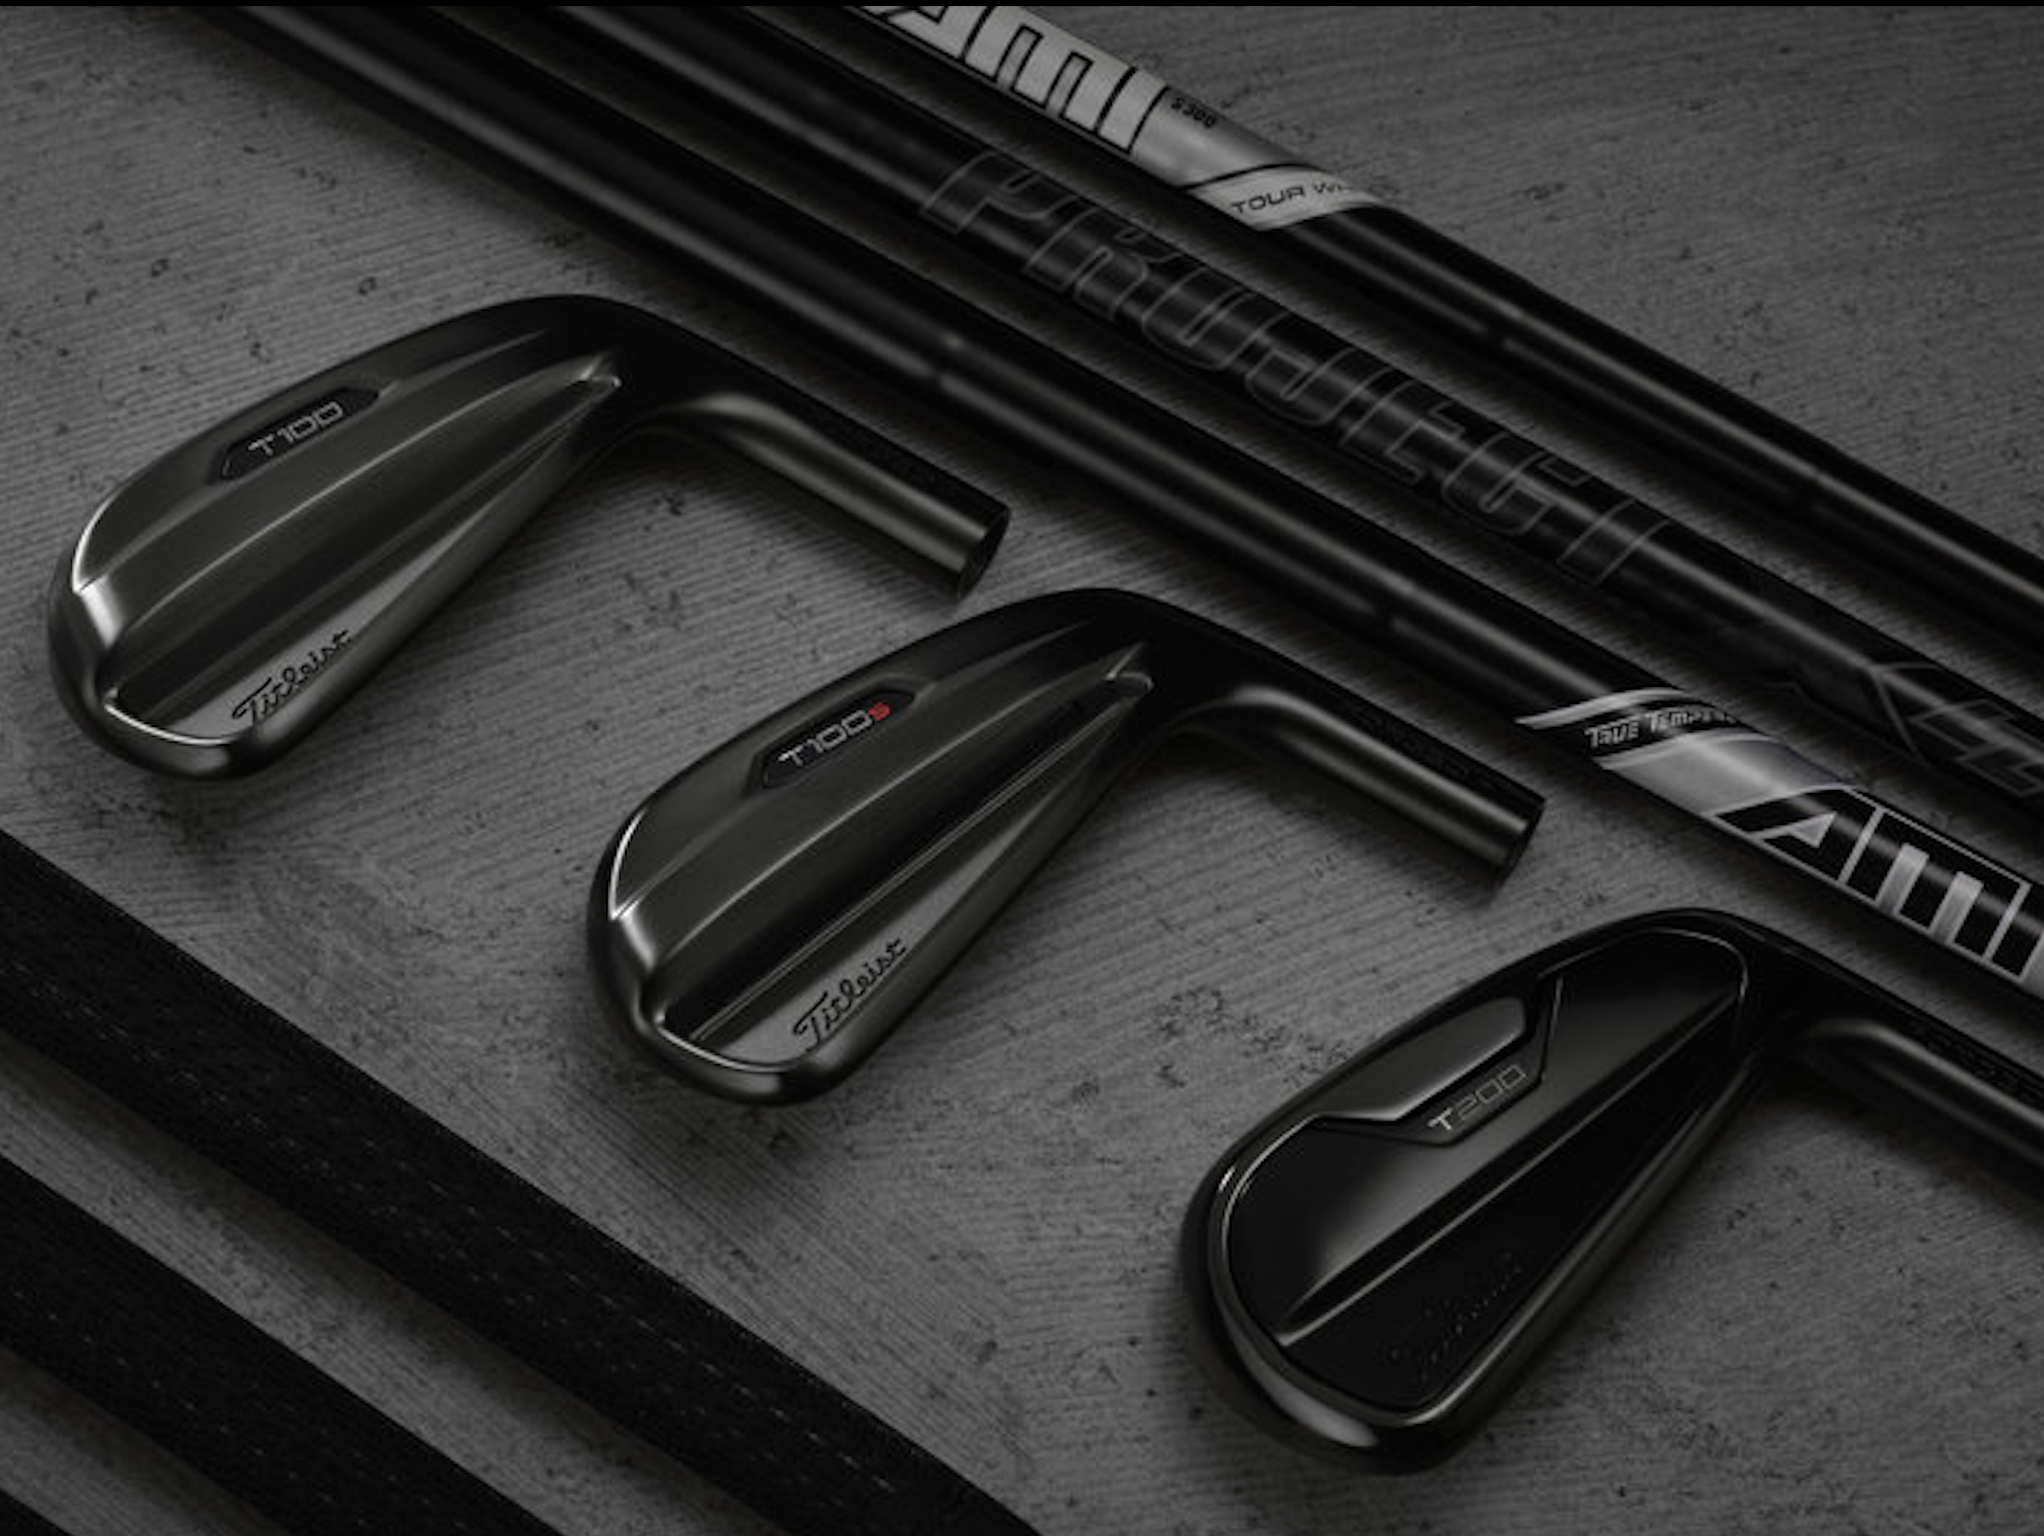 Titleist introduces limited-edition T100, T100S, T200 irons in tour-inspired black finish